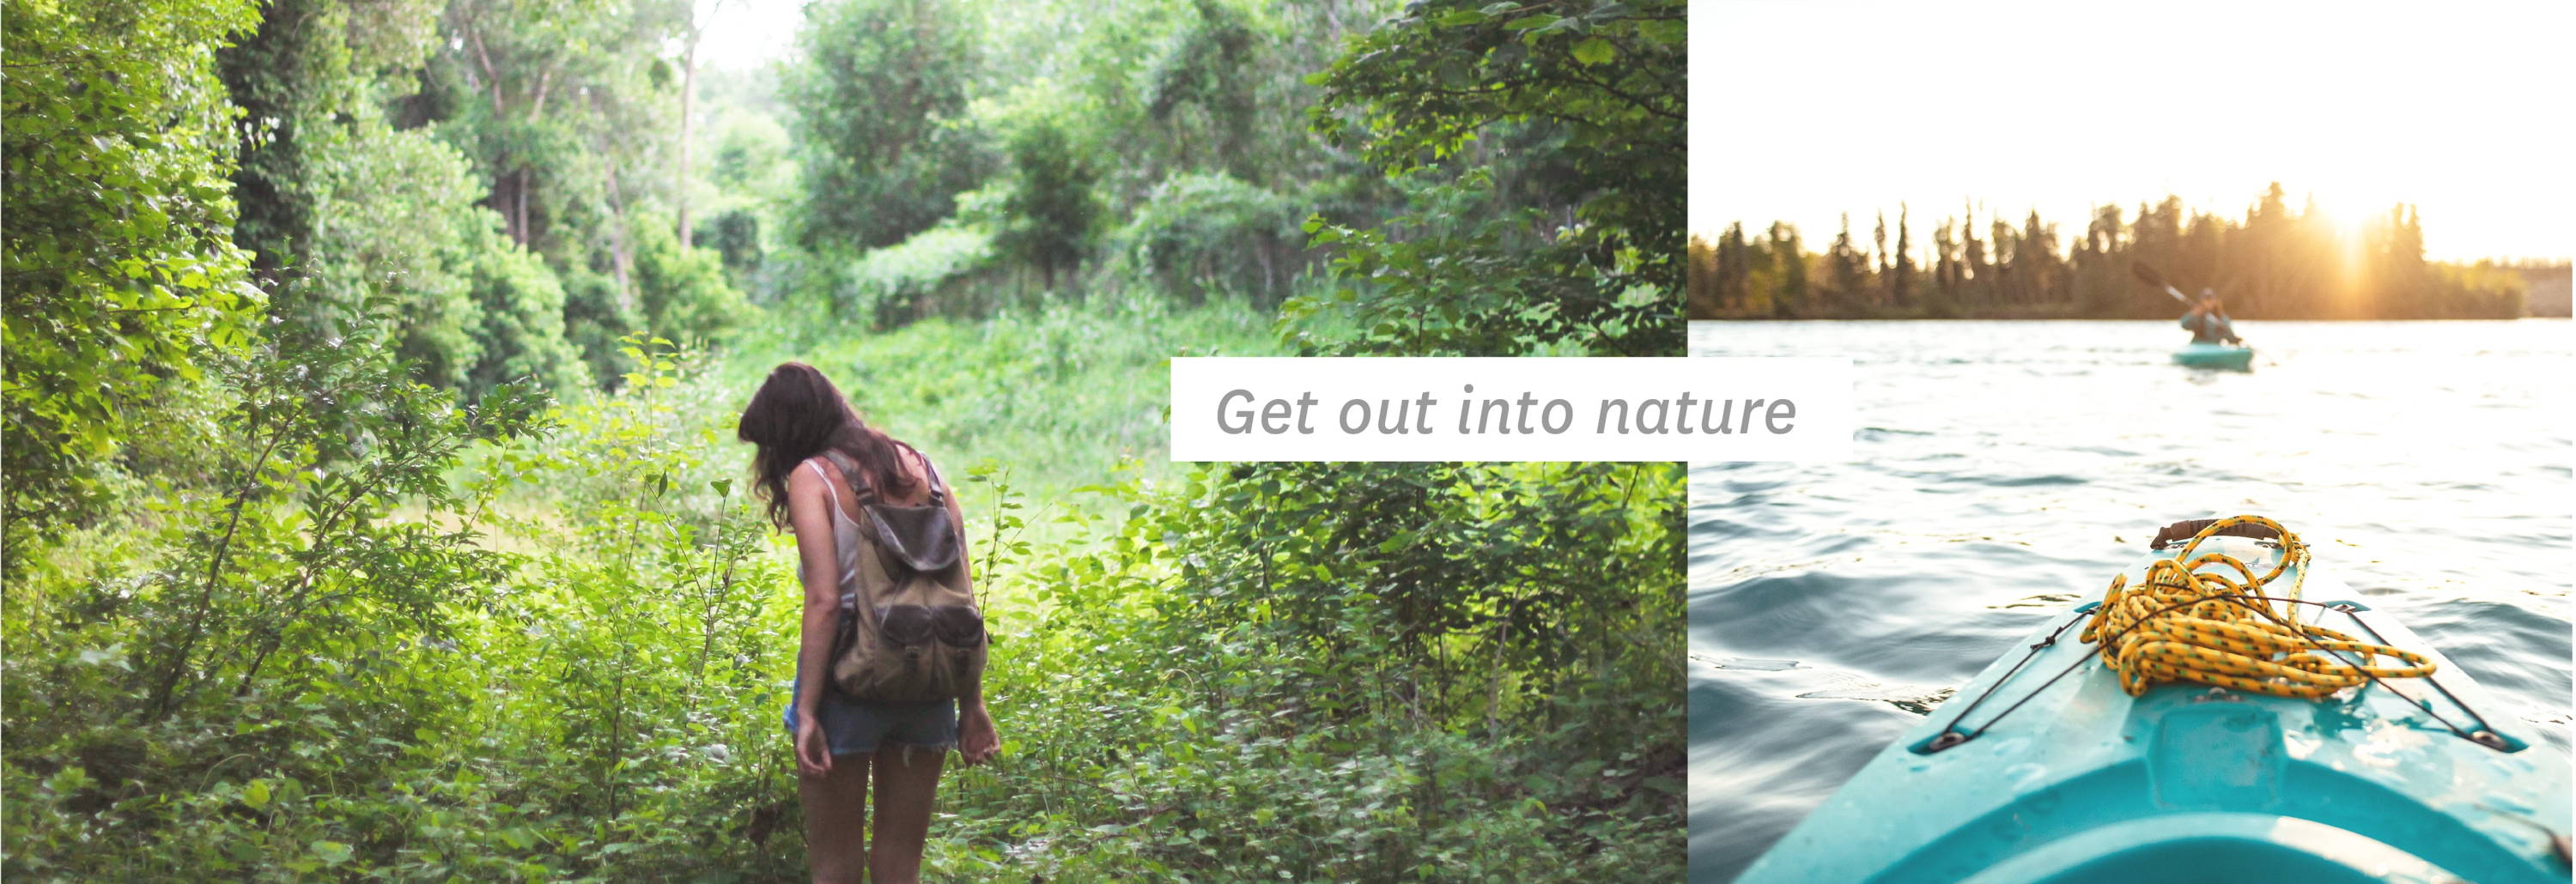 Get out into nature